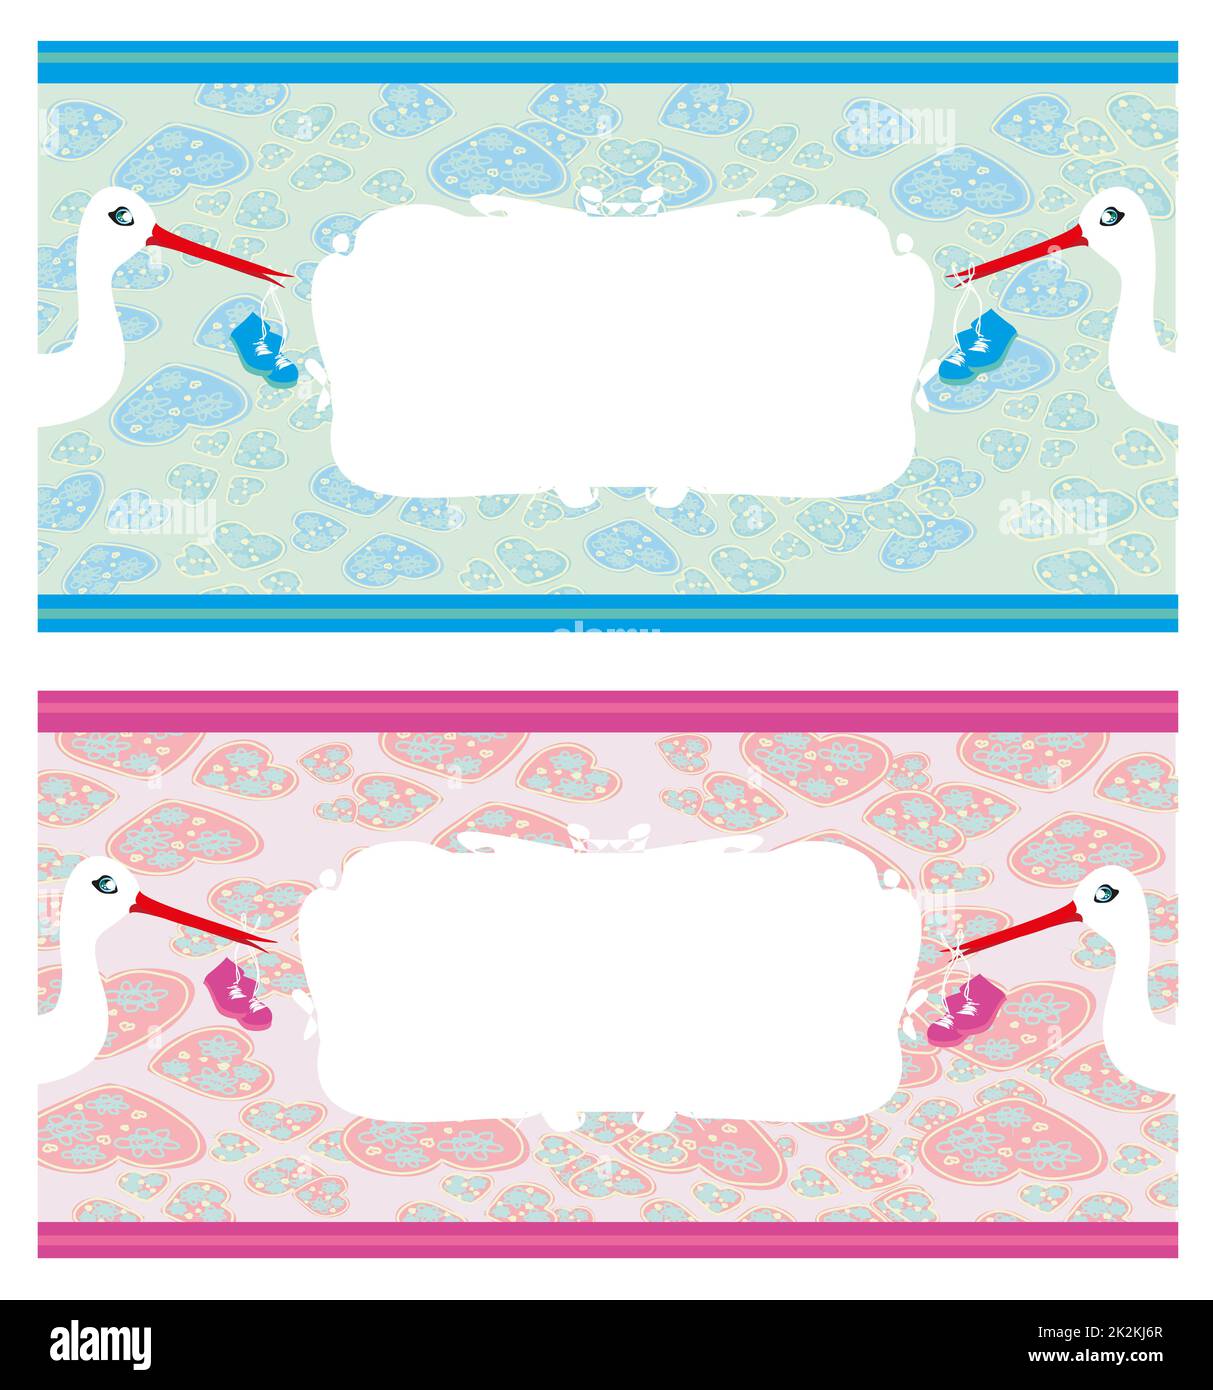 Newborn set banners.Two colors for boys and girls. Stock Photo